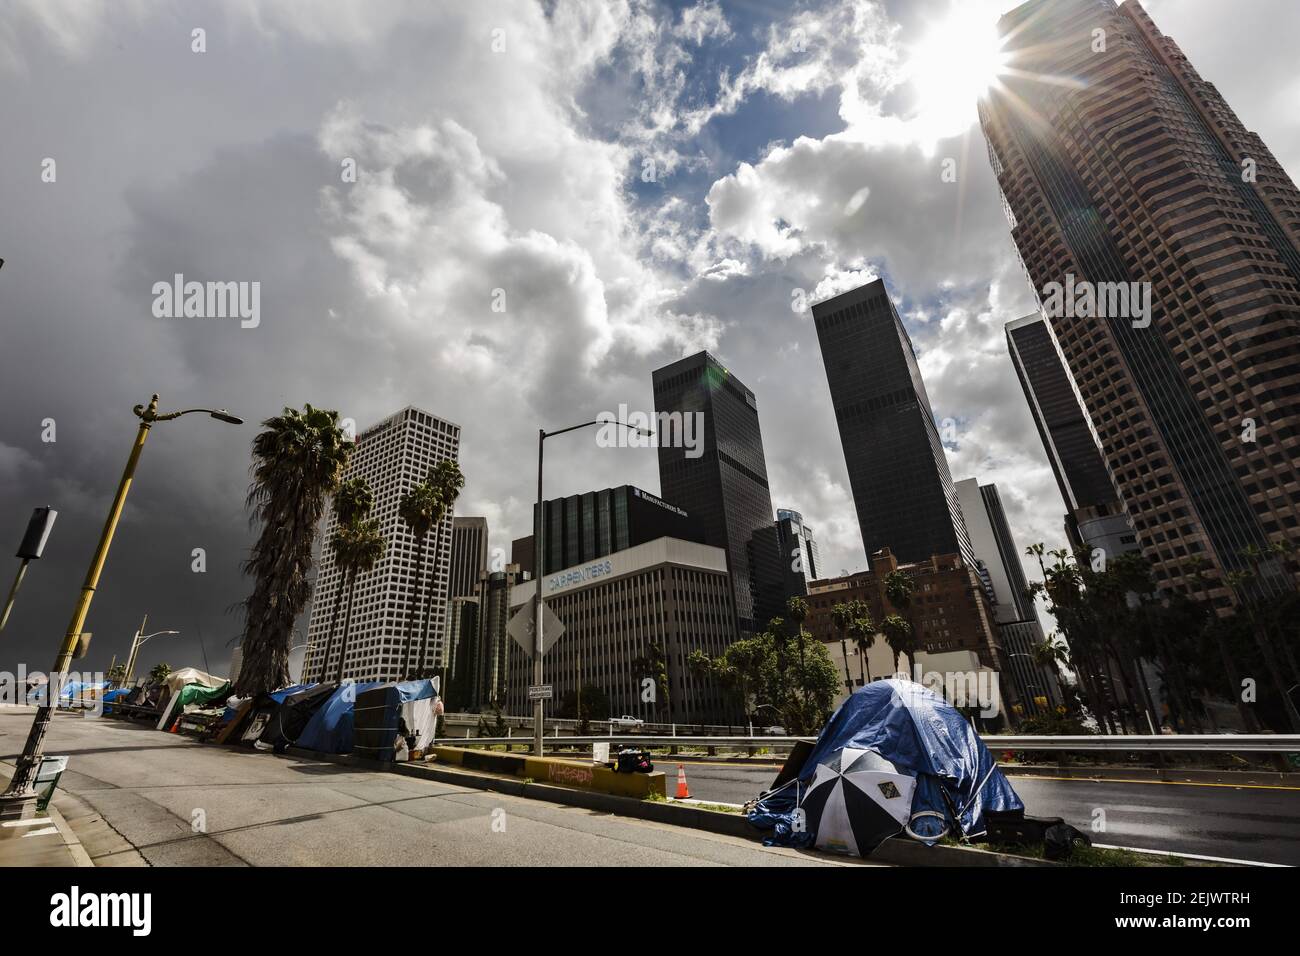 A homeless camp in the shadows of downtown L.A.Õs bank towers. The homeless are now the most vunerable to contracting and dealing with the Covid19 virus. 3/19/2020 Los Angeles, CA USA (Photo by Ted Soqui/SIPA USA)  Stock Photo